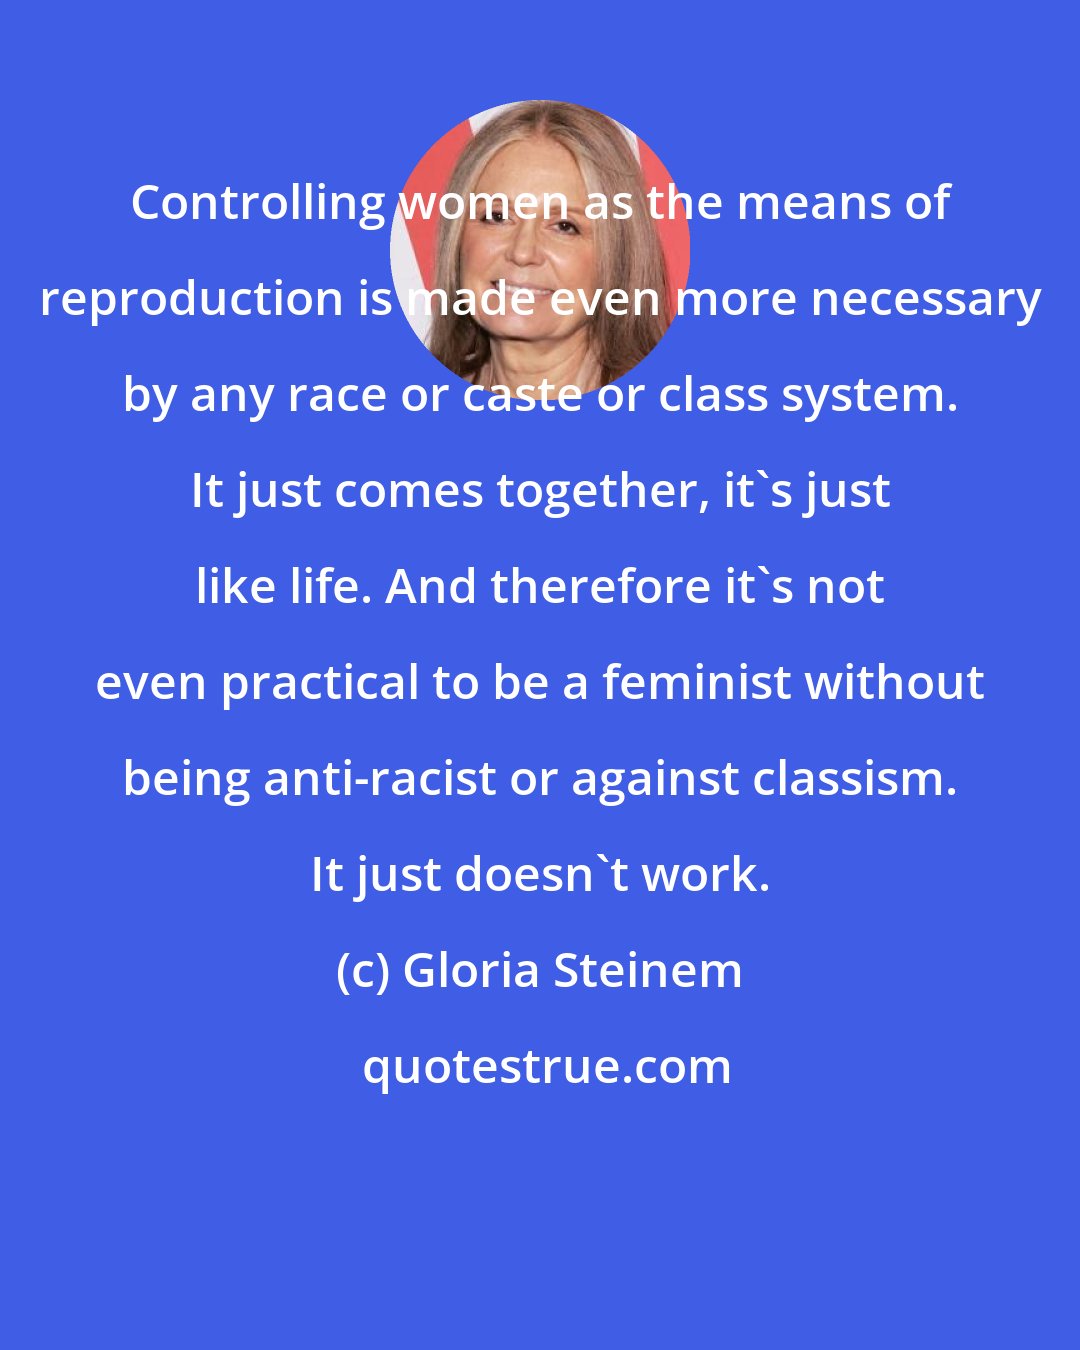 Gloria Steinem: Controlling women as the means of reproduction is made even more necessary by any race or caste or class system. It just comes together, it's just like life. And therefore it's not even practical to be a feminist without being anti-racist or against classism. It just doesn't work.